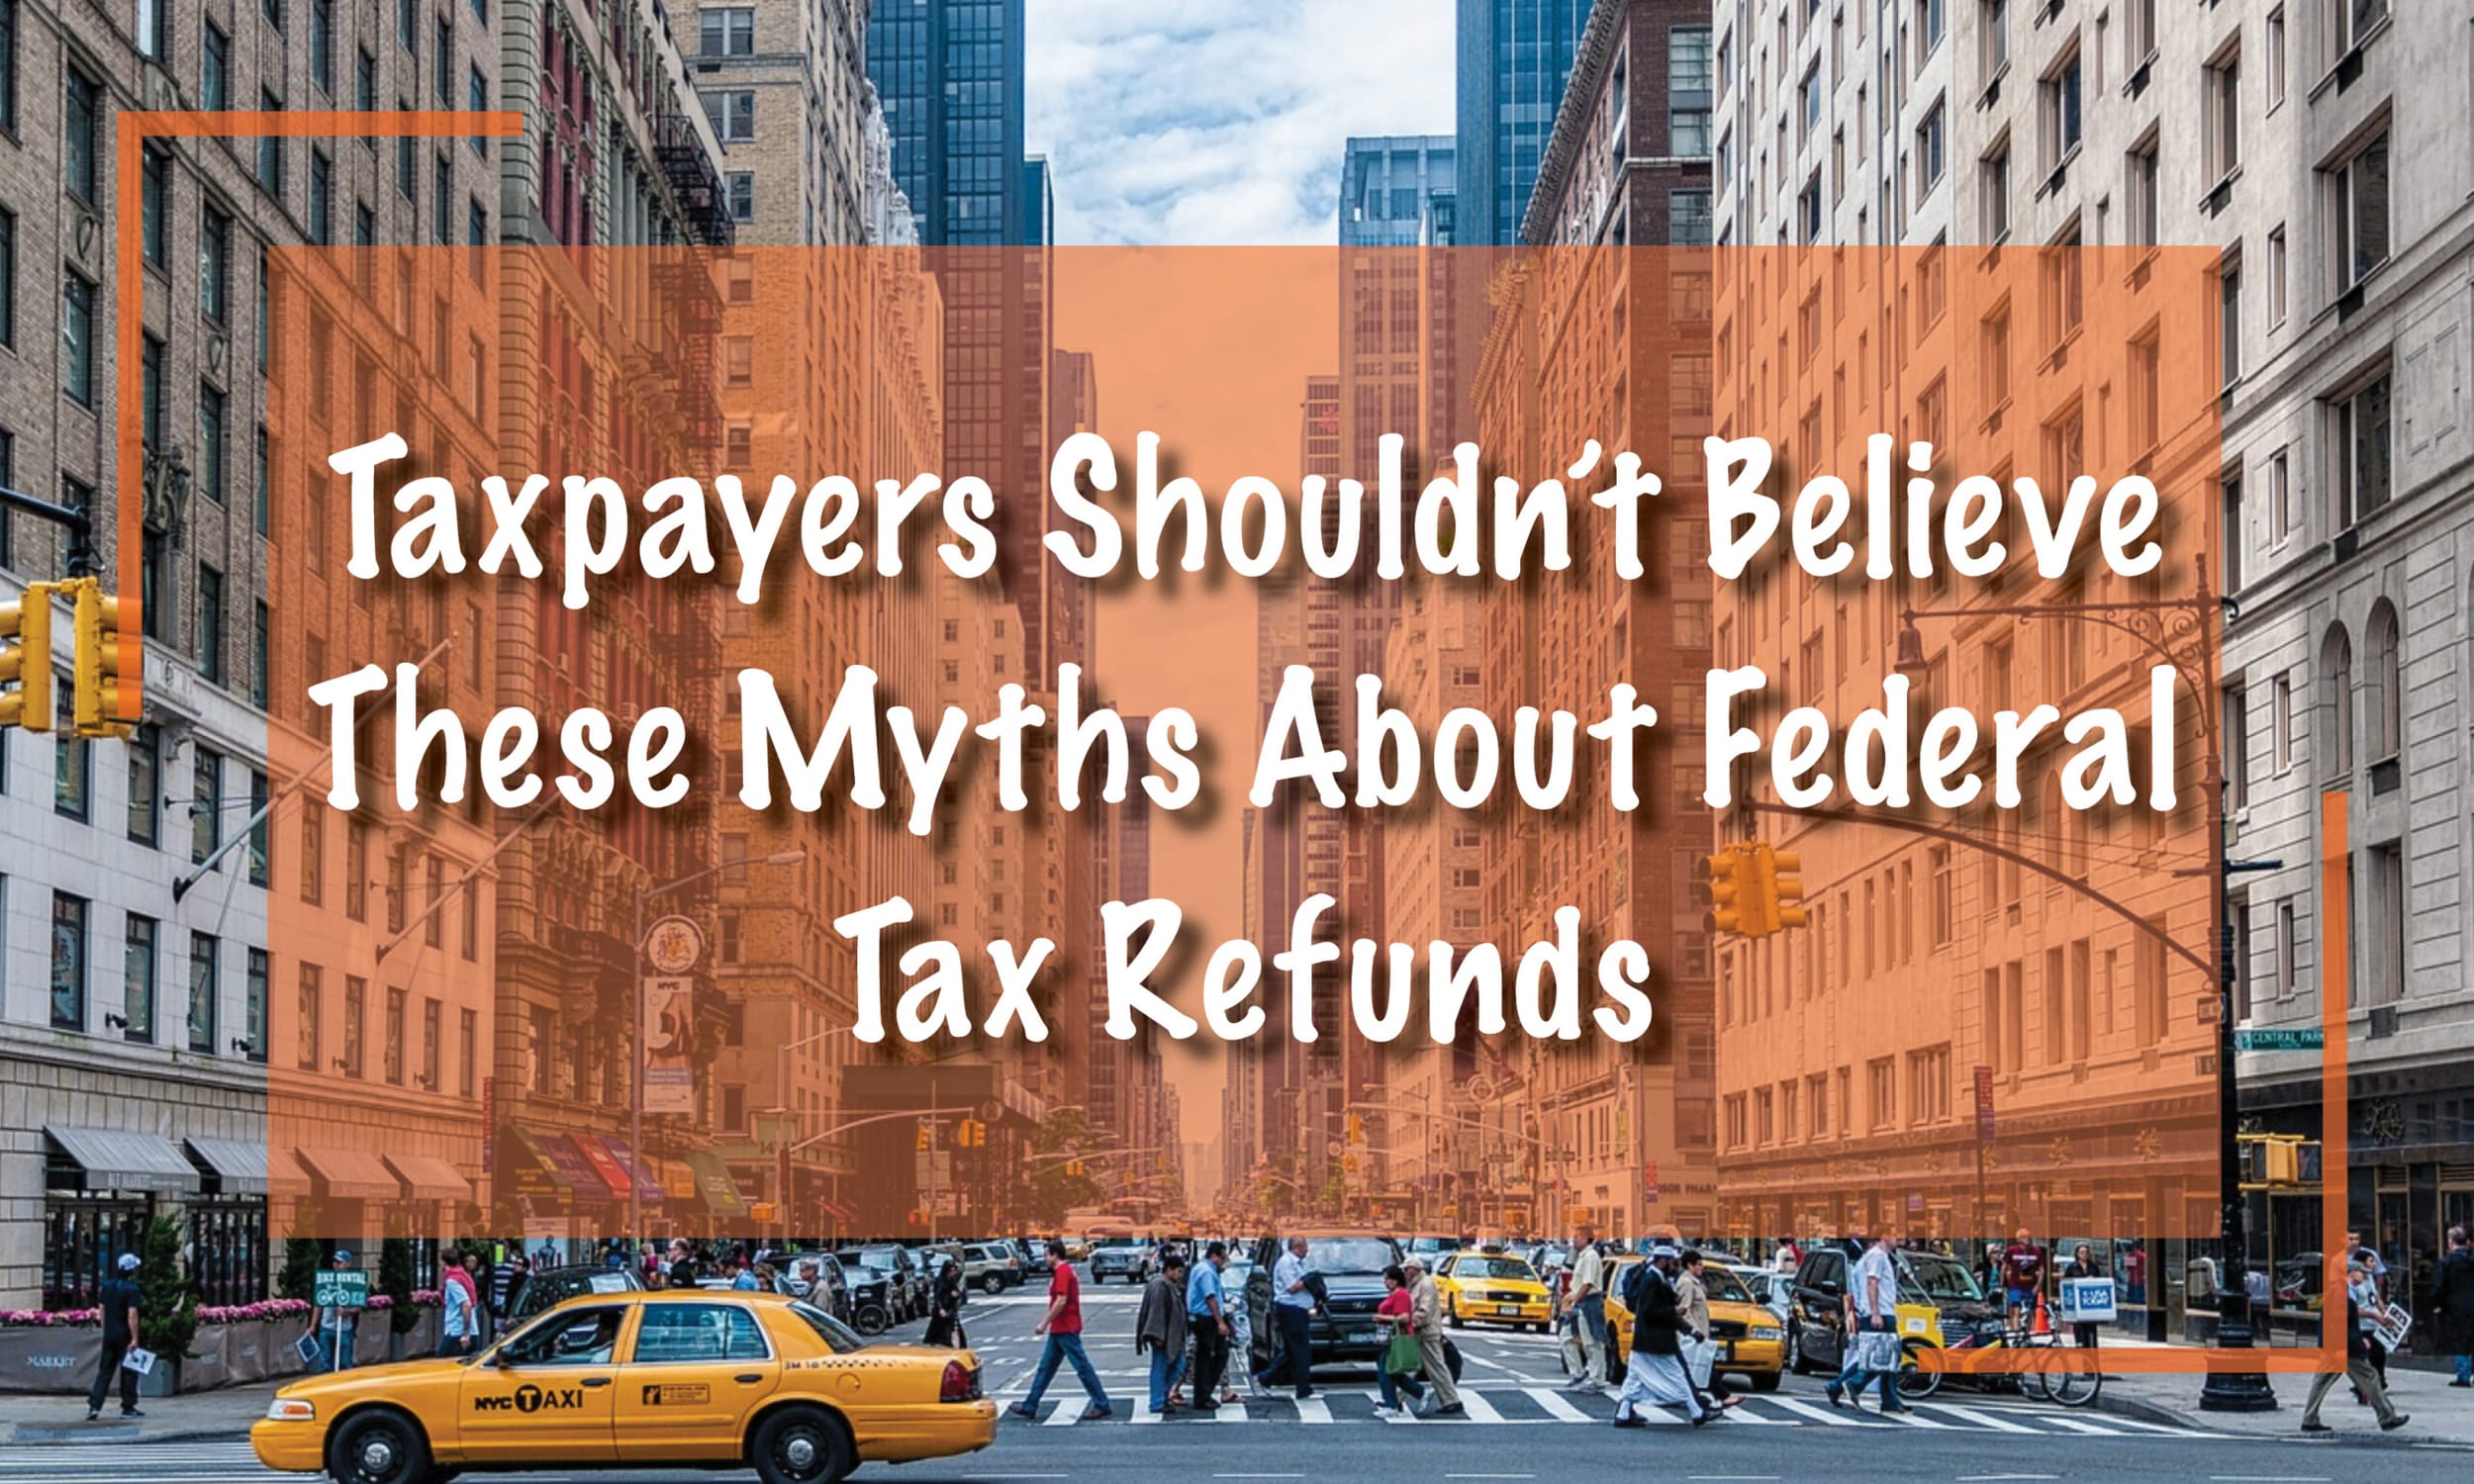 Taxpayers shouldn’t believe these myths about federal tax refunds